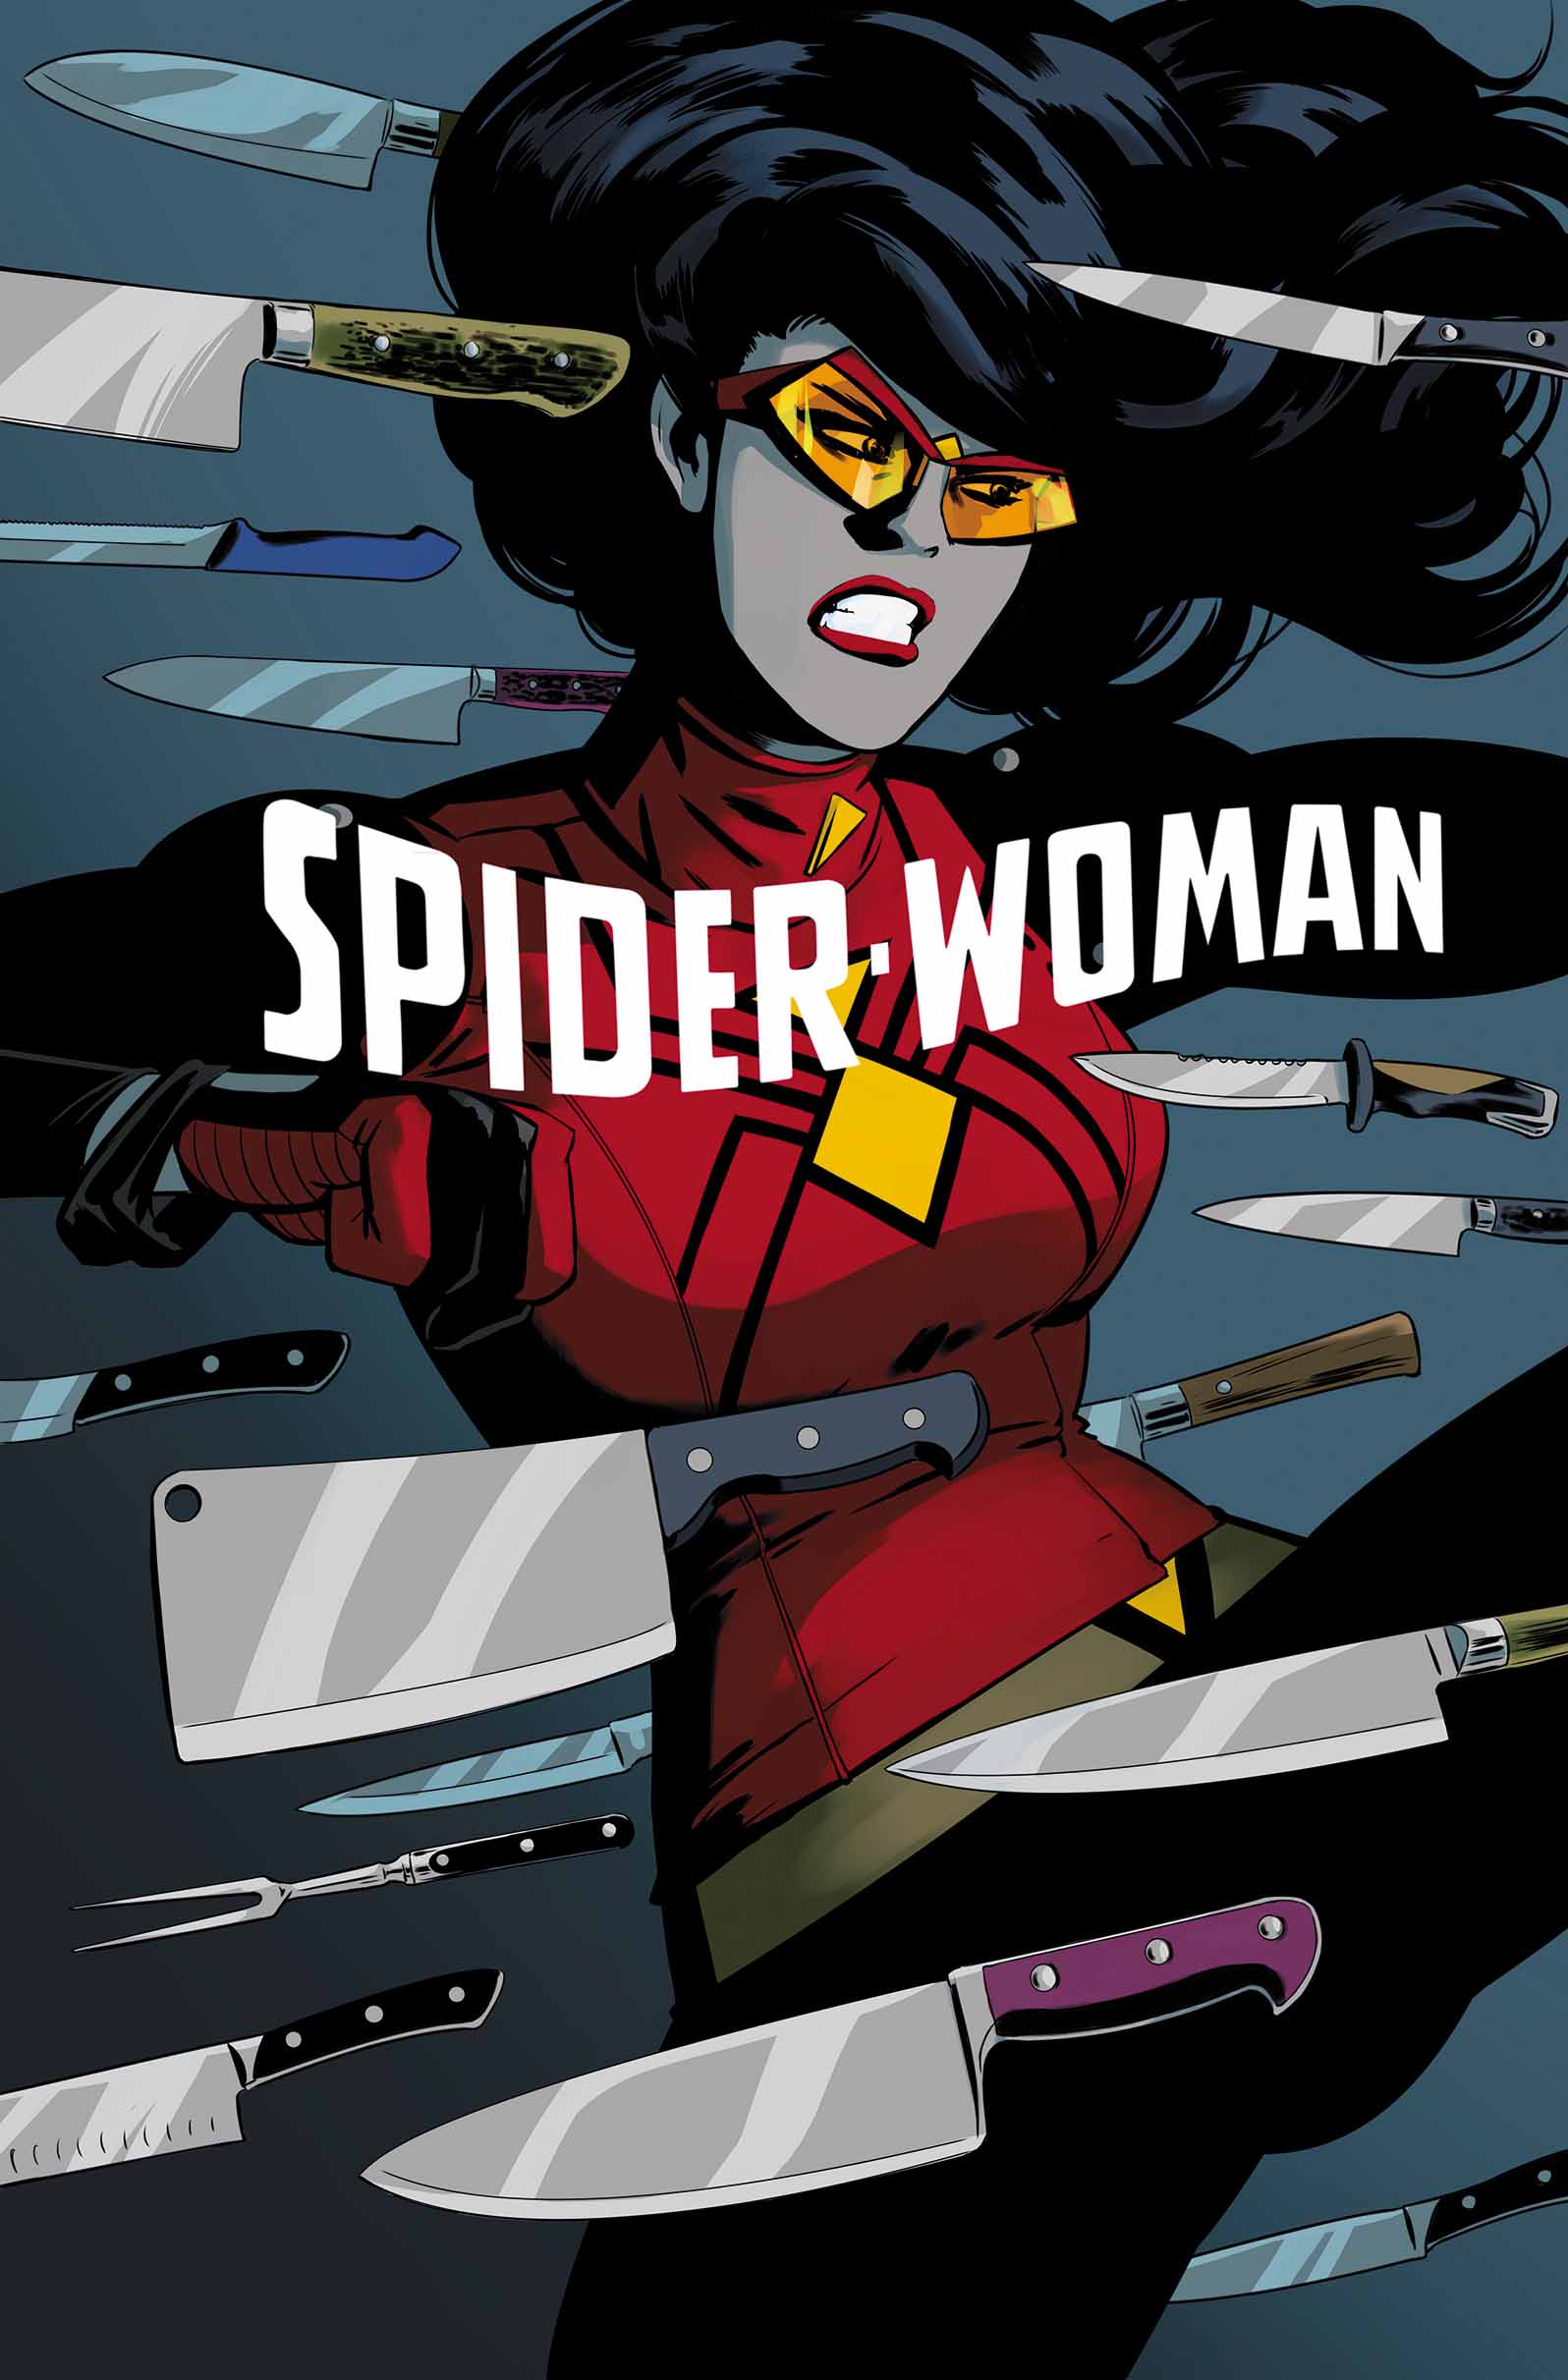 SPIDER-WOMAN #6 VARIANT